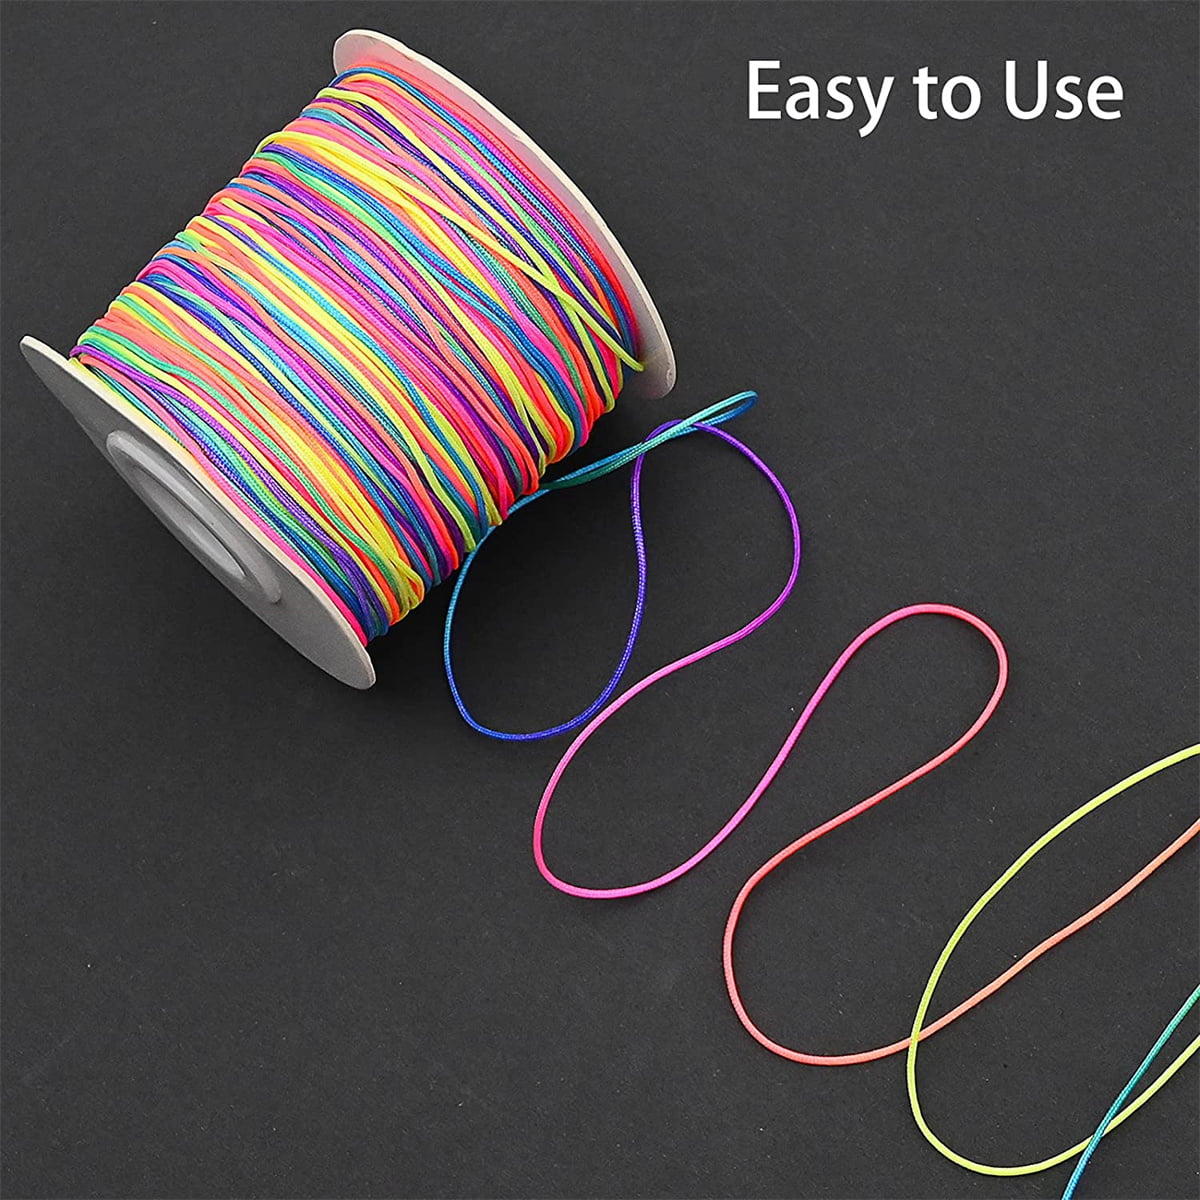 Casewin Elastic String for Pony Beads for Kids, 1mm Rainbow Elastic Cord  String for Bracelet Making, Colorful Stretchy Cord for Jewelry Making, 100m  Rainbow 